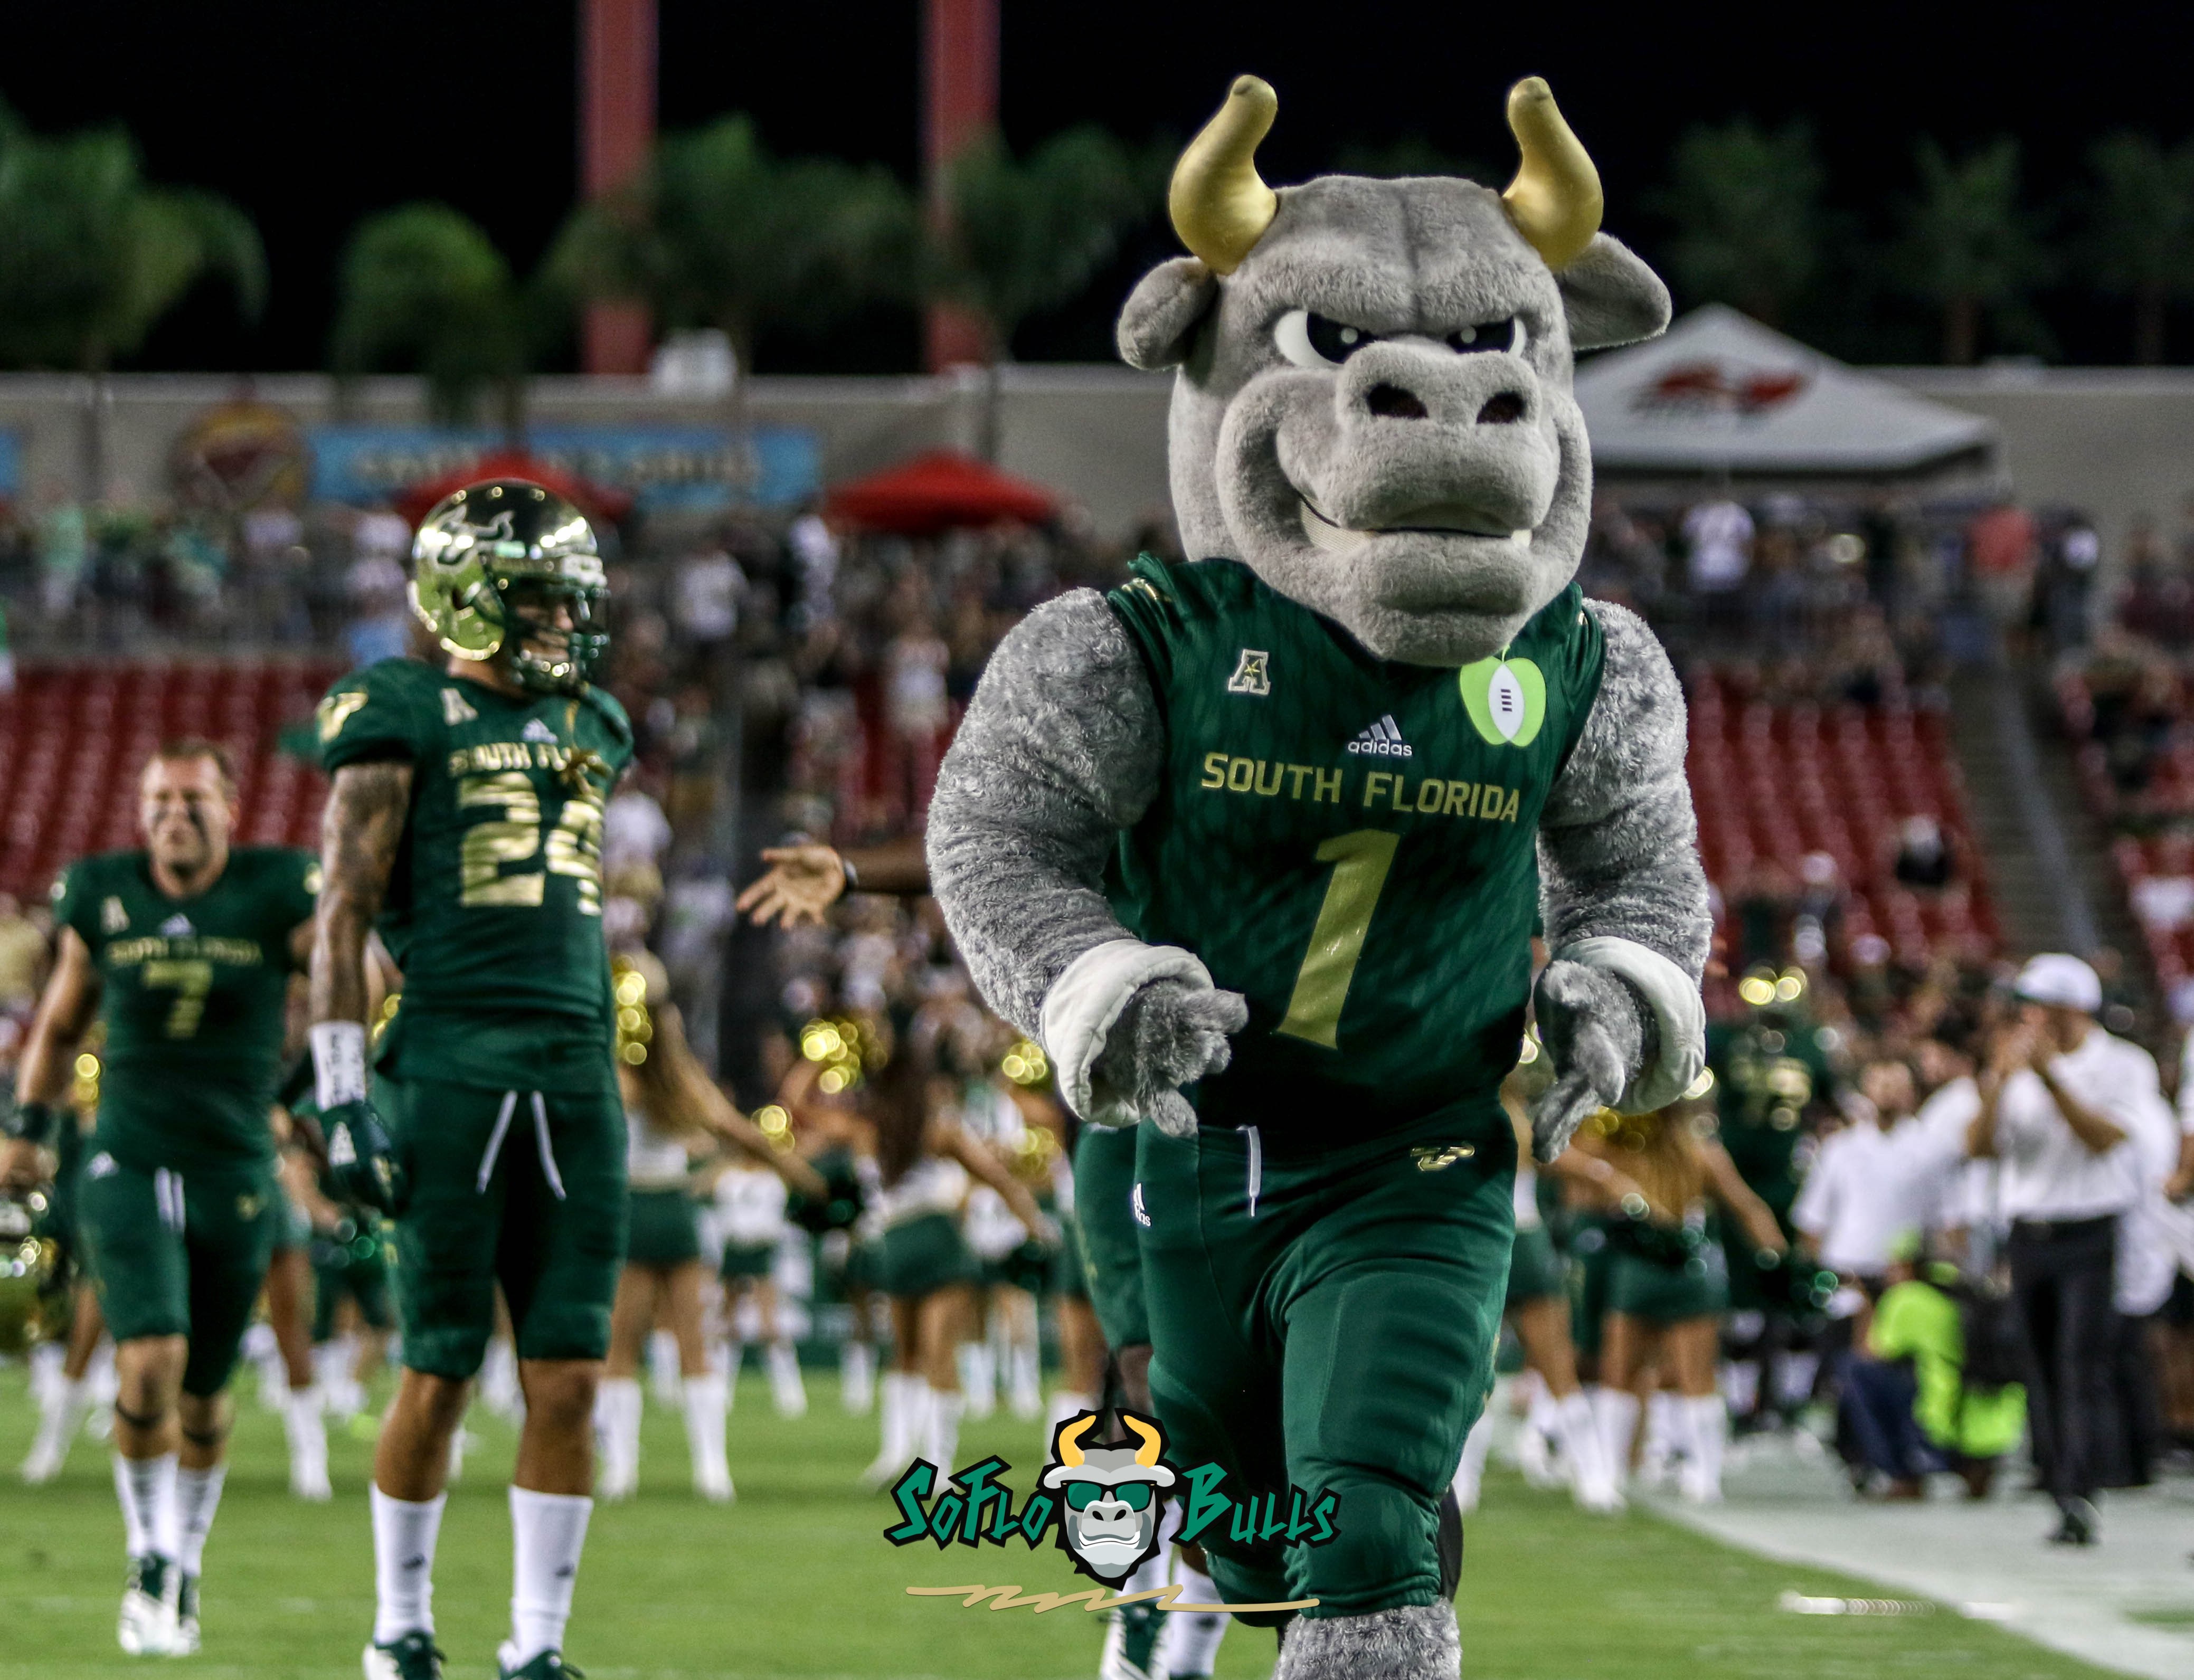 December 23, 2017; Birmingham, AL, USA; USF Mascot, ROCKY THE BULL, poses  during the NCAA D1 football game in Birmingham. The University of South  Florida Bulls defeated the Texas Tech Raiders, 38-34